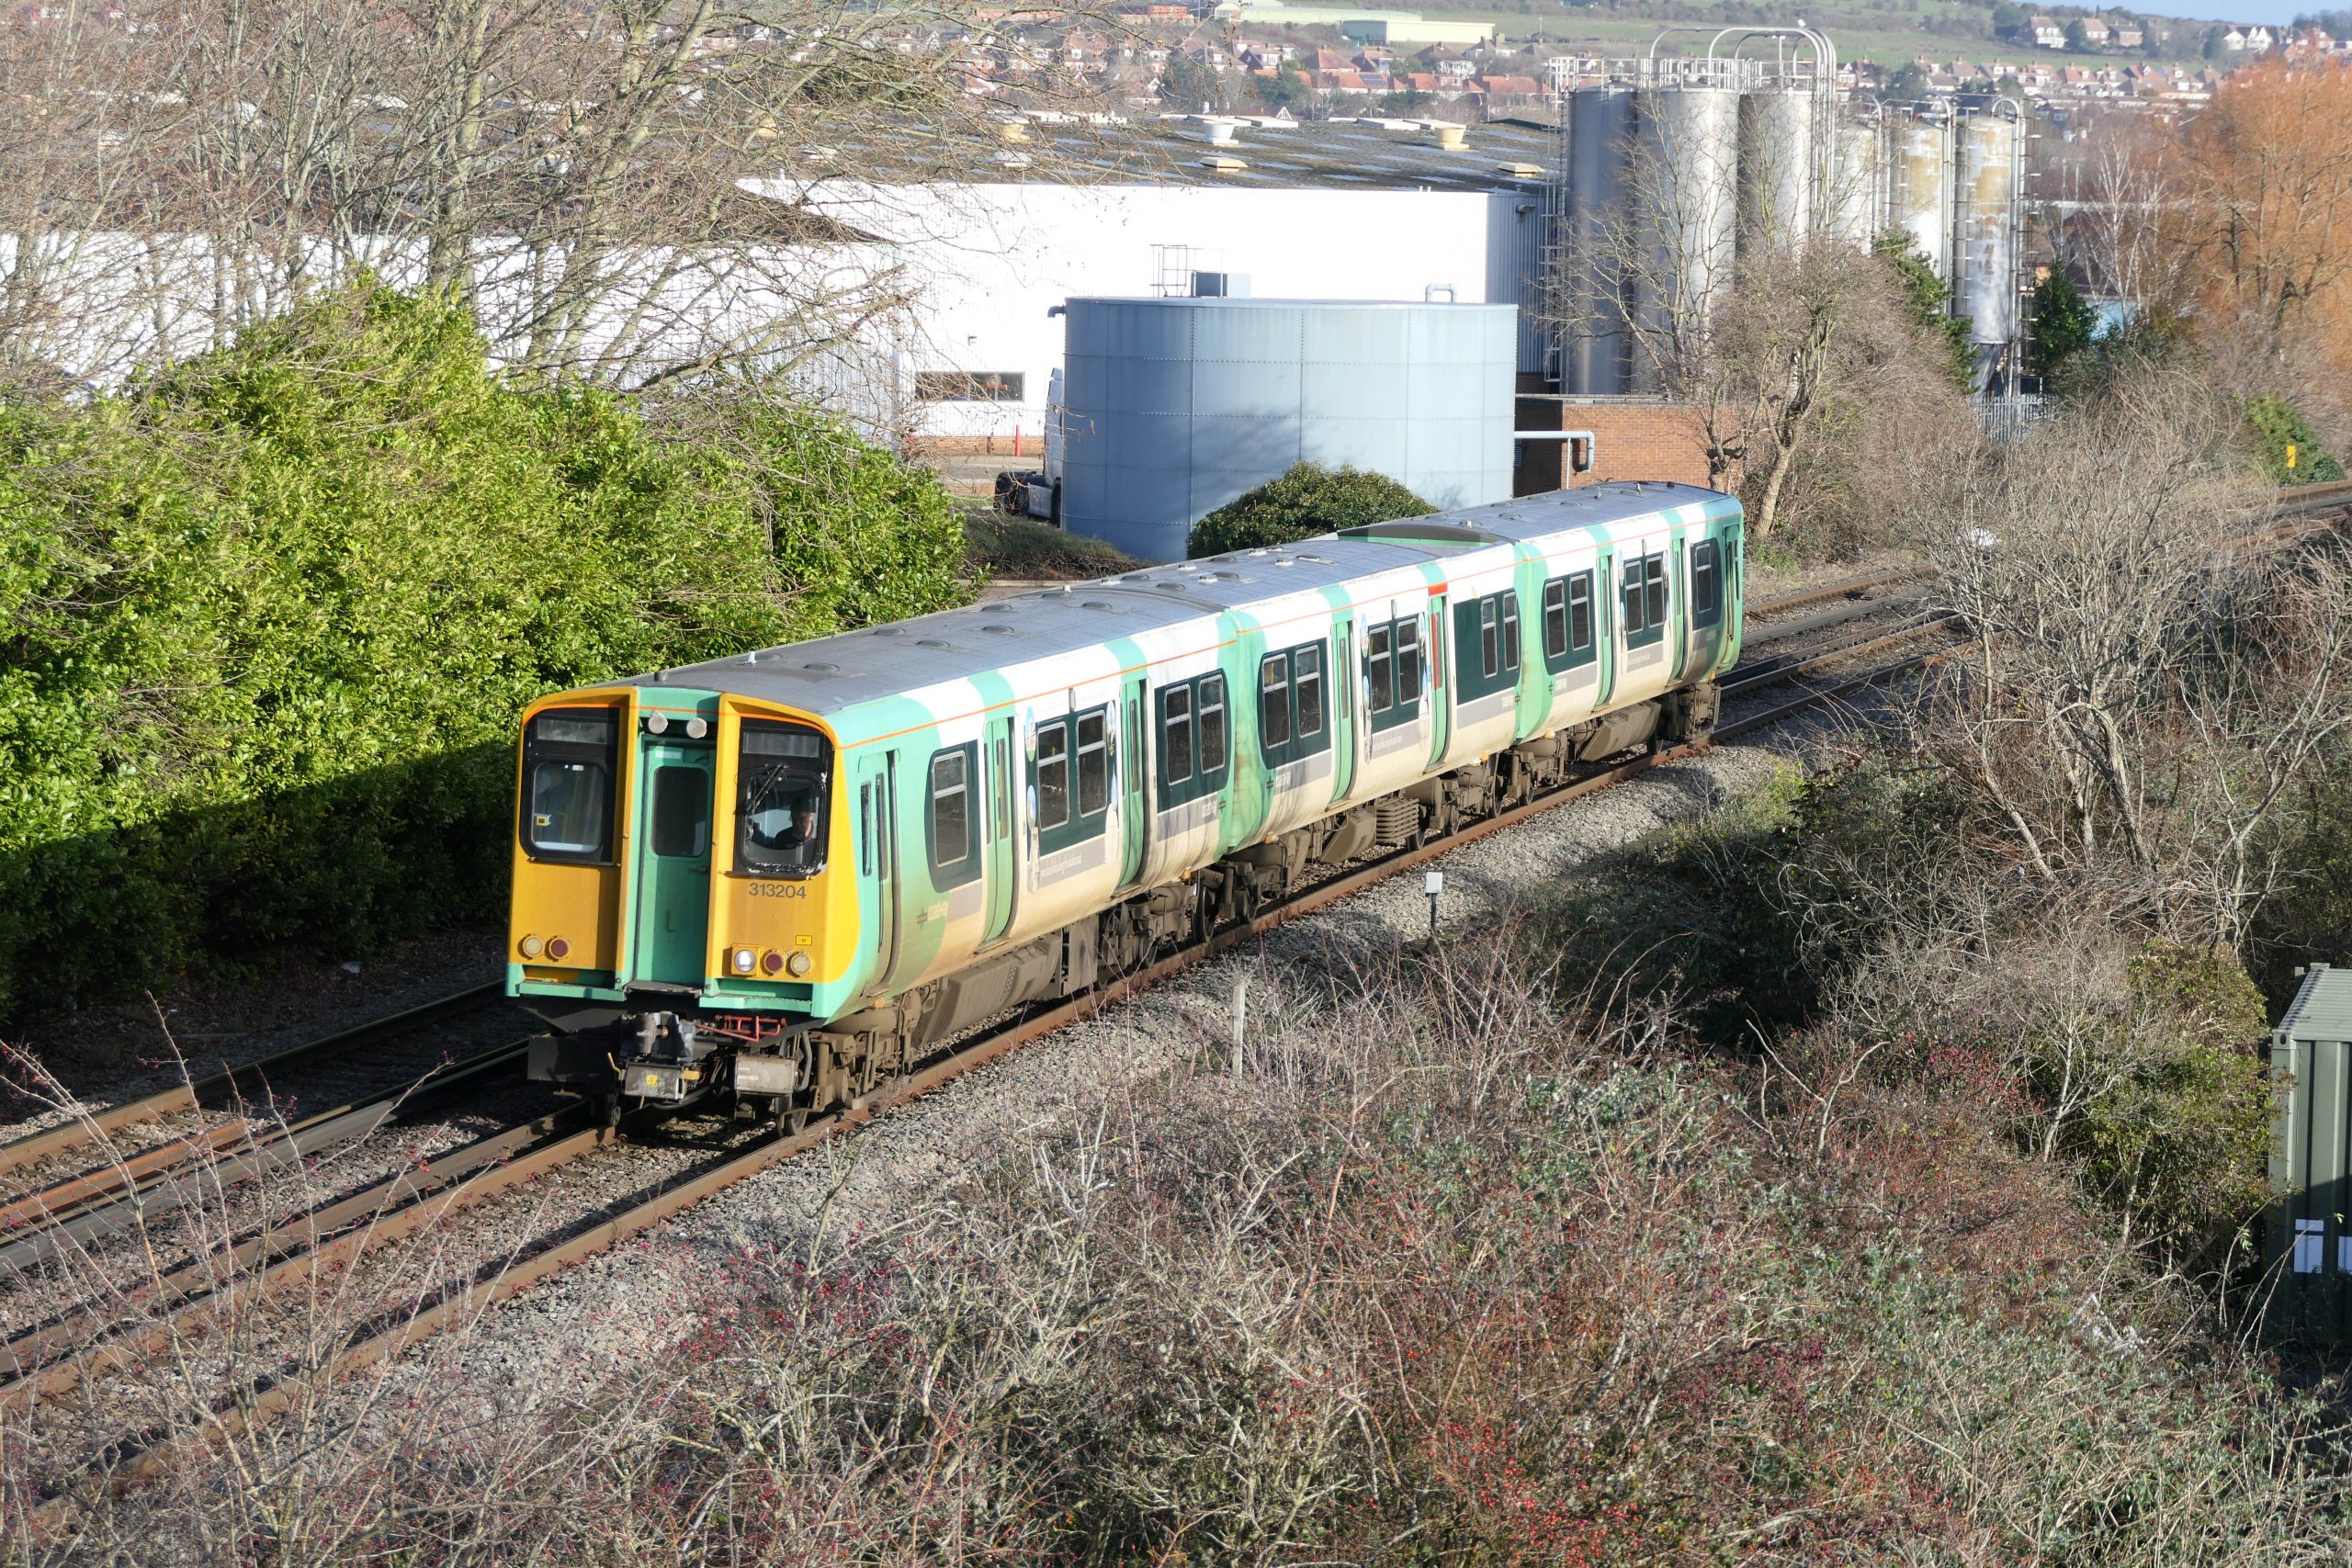 313 204 Approaching Portcreek Junction forming the 10:02 Brighton to Portsmouth Harbour. 23 December 2019.